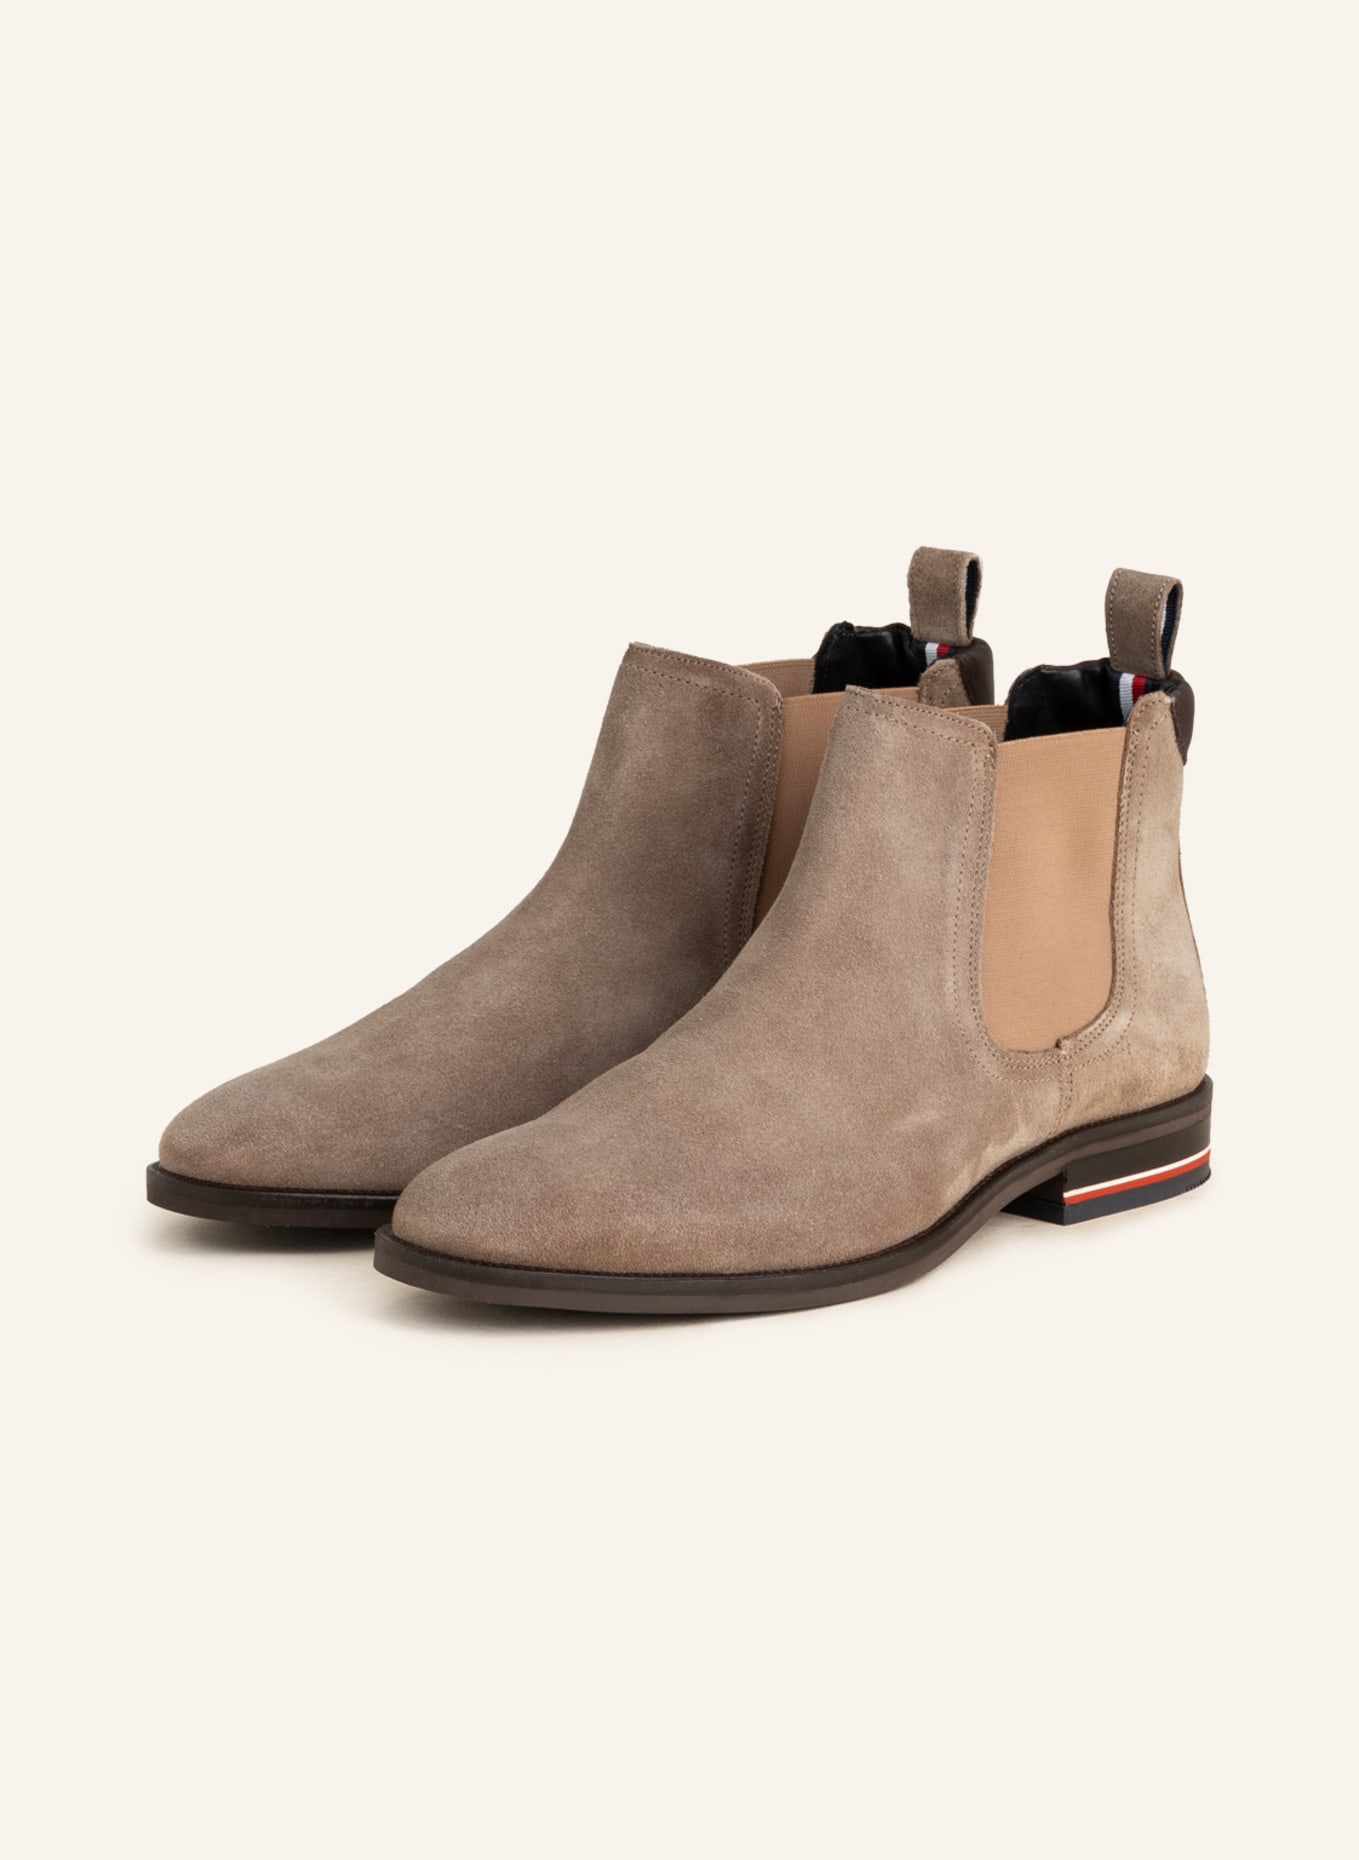 TOMMY HILFIGER Chelsea-Boots, Farbe: TAUPE (Bild 1)